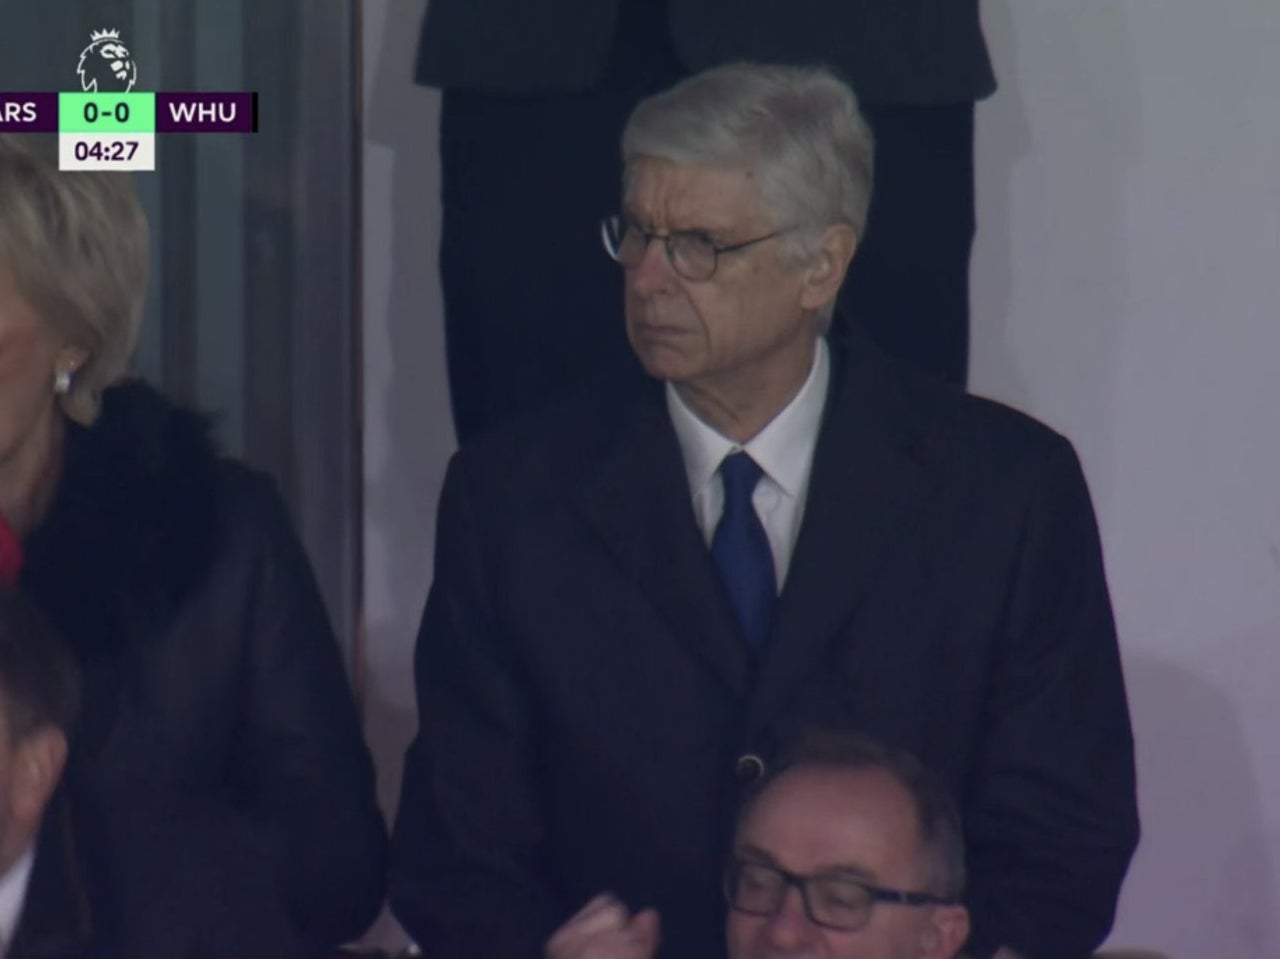 Arsene Wenger watched on as Arsenal played West Ham